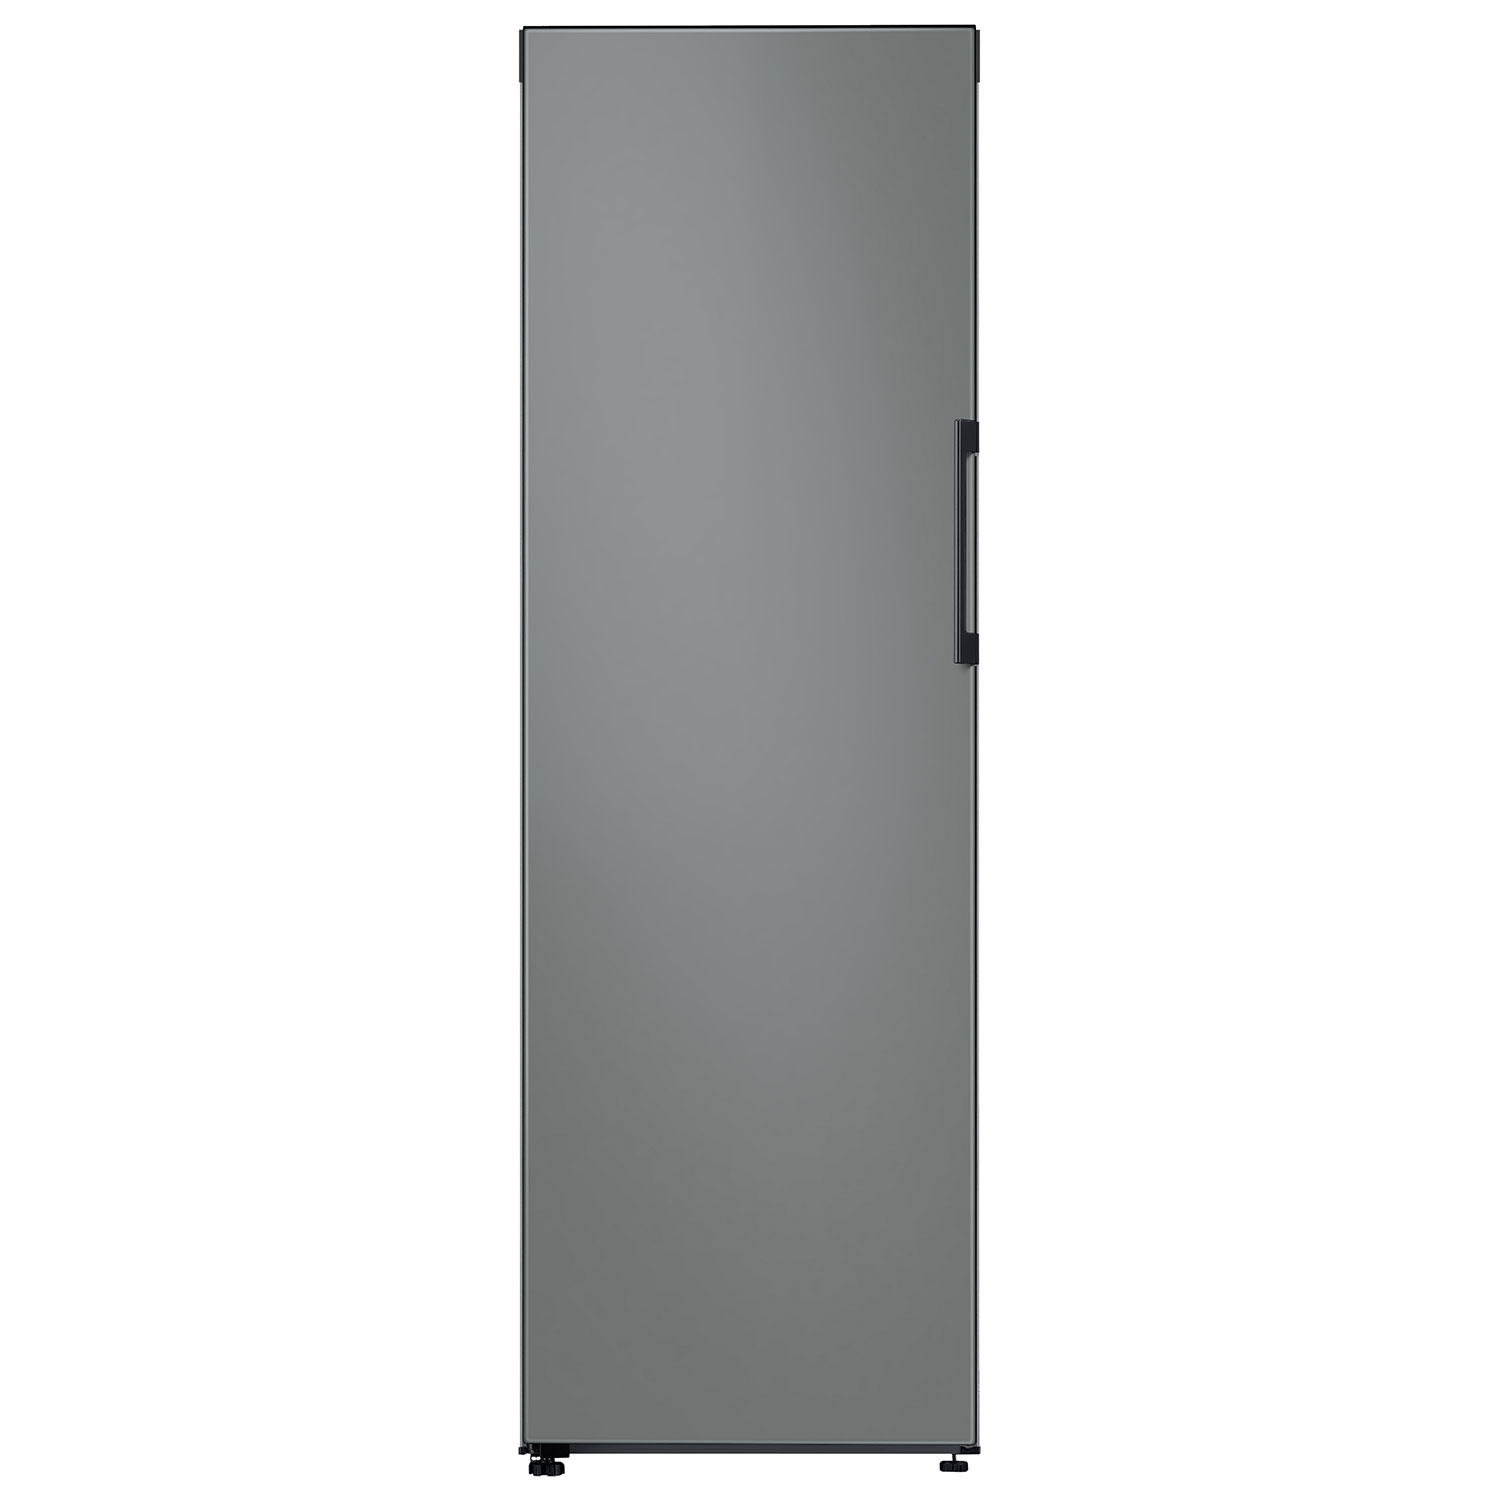 Samsung 11.4 cu. ft. BESPOKE Flex Column Refrigerator with Customizable Colors and Flexible Design in White Glass